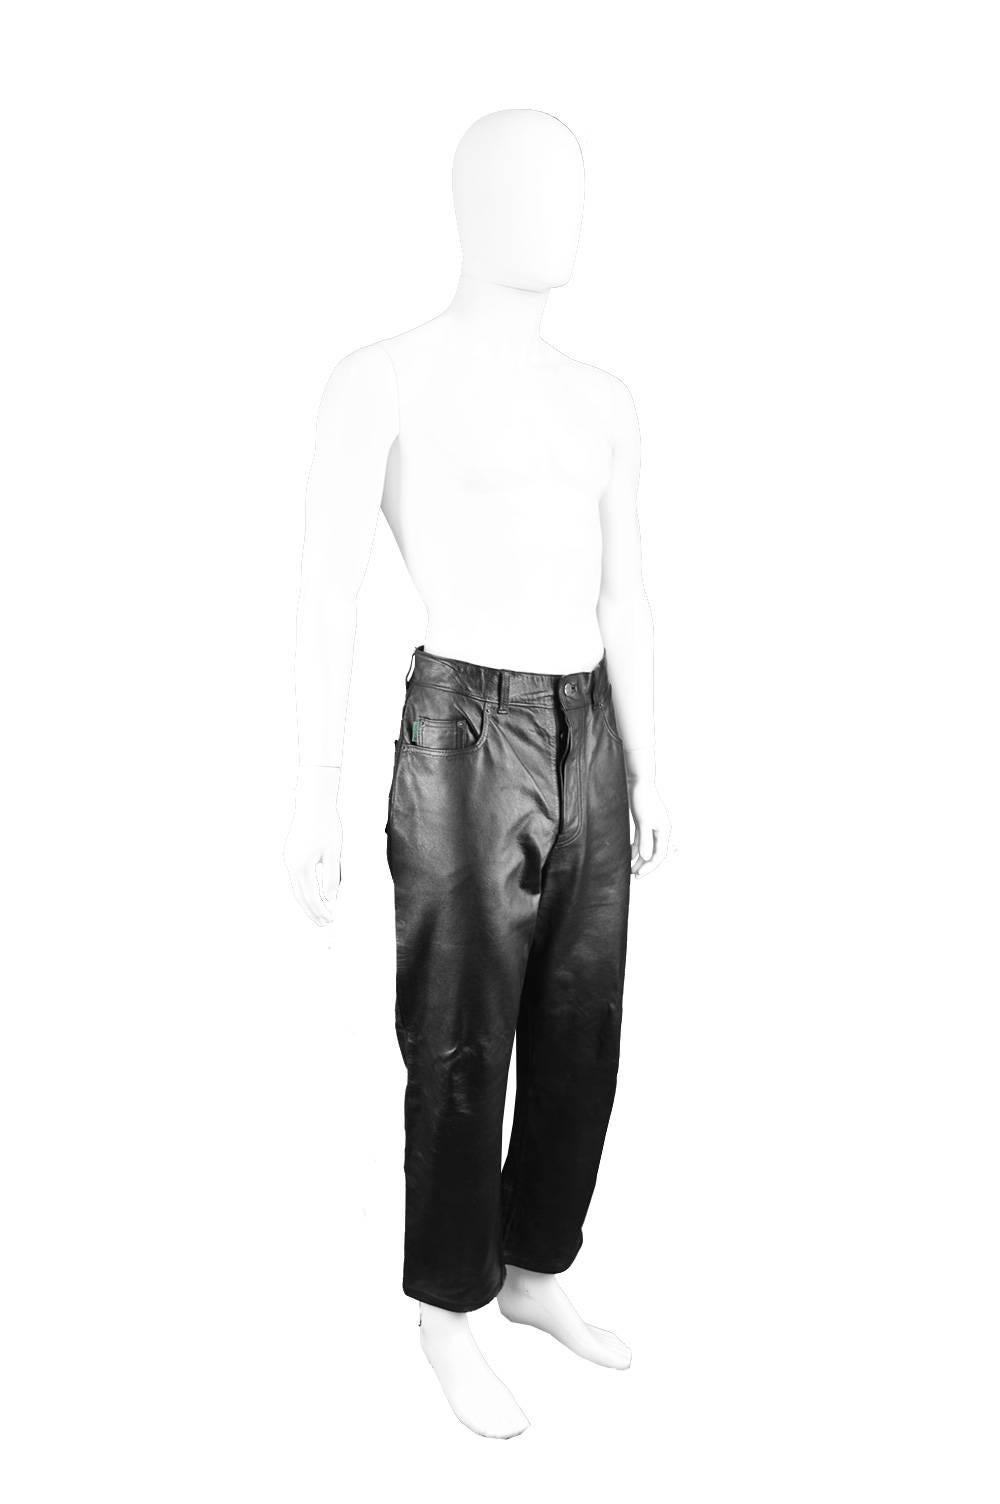 Paul Smith Men's Vintage Black Real Leather Straight Leg Pants, 1990s For Sale 4